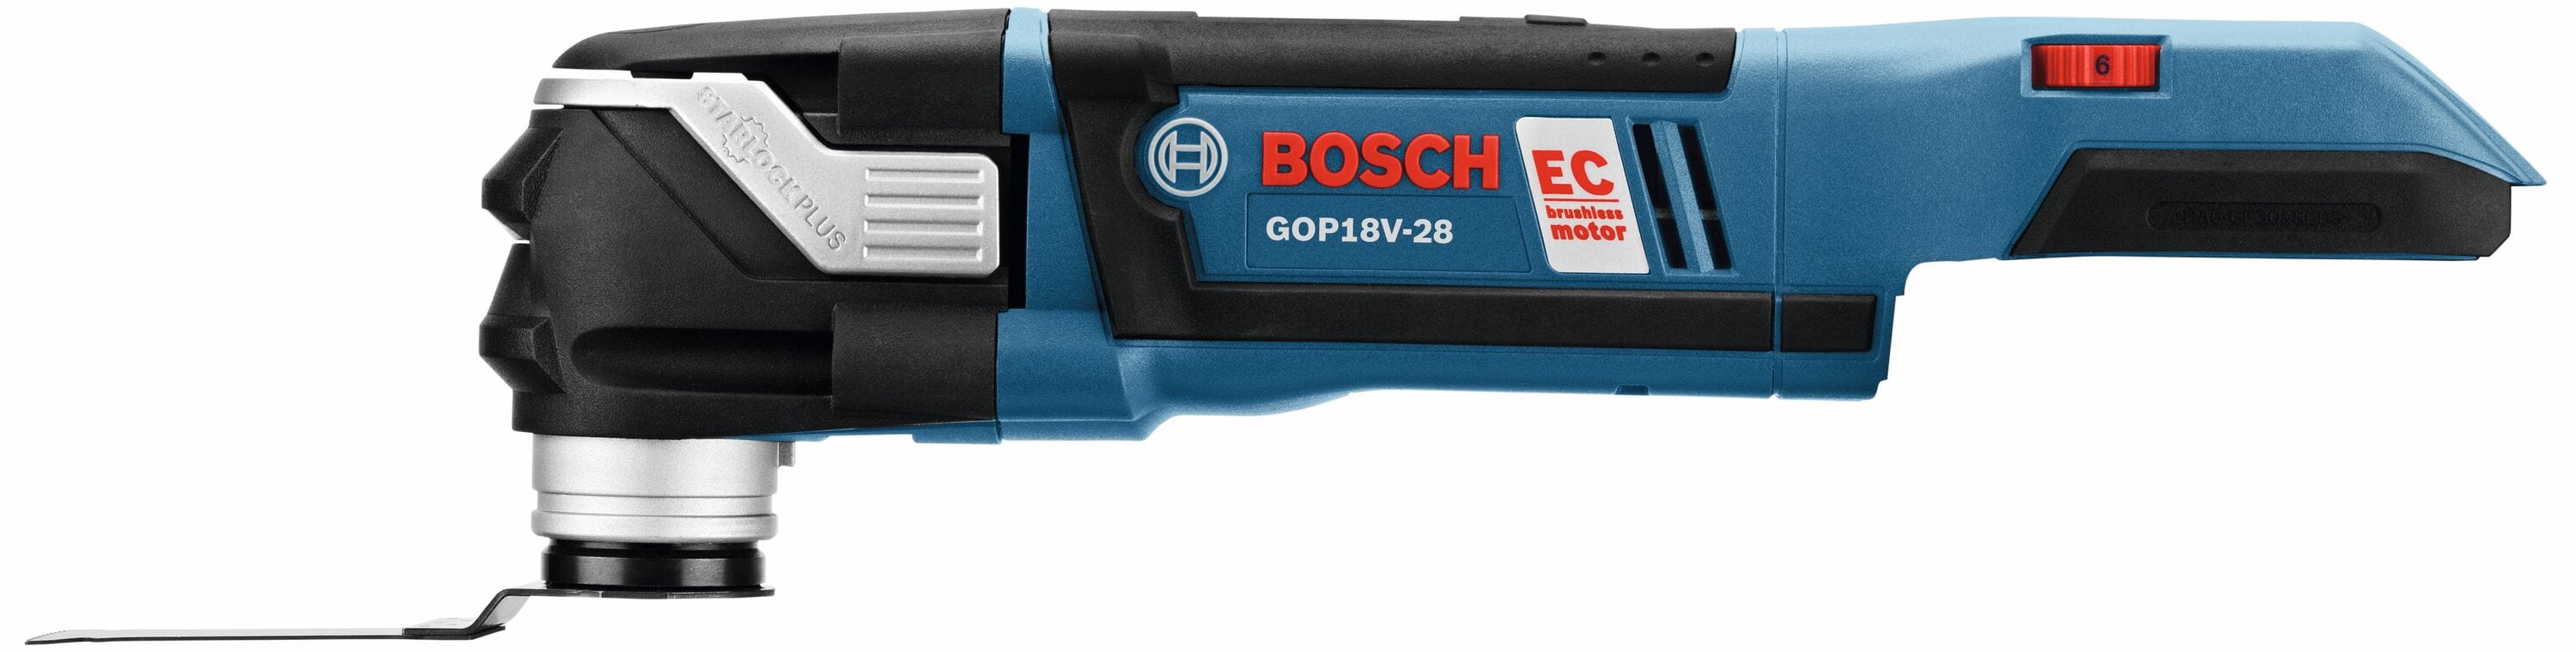 department Brushless 18-volt the Oscillating Speed in at Cordless Multi-Tool Bosch Tool StarlockPlus Kits Oscillating Variable